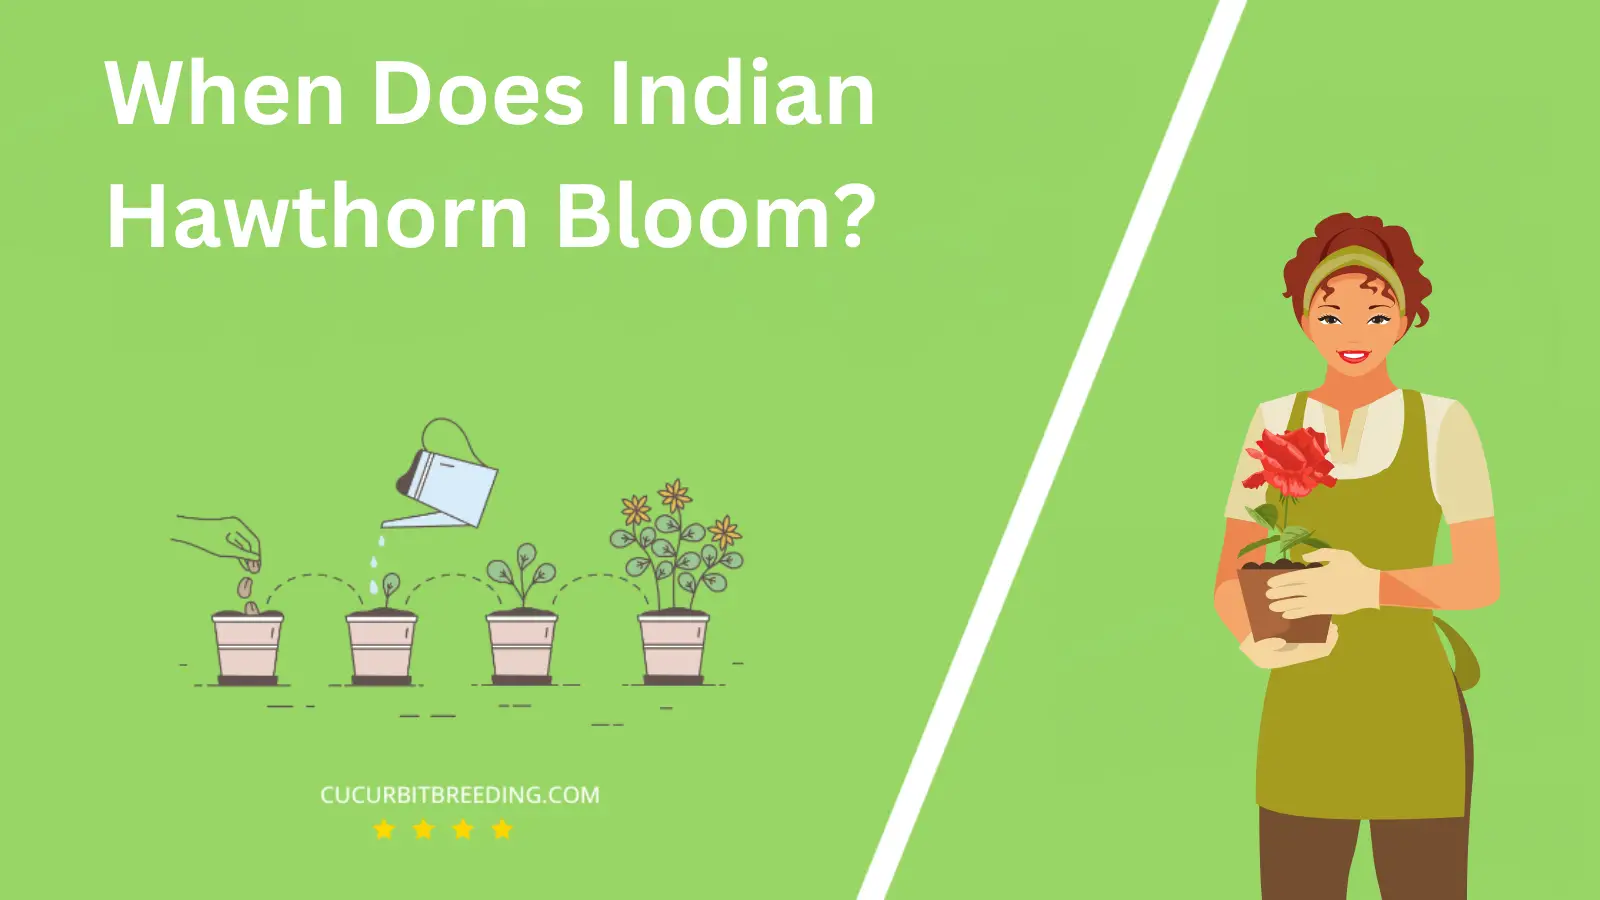 When Does Indian Hawthorn Bloom?